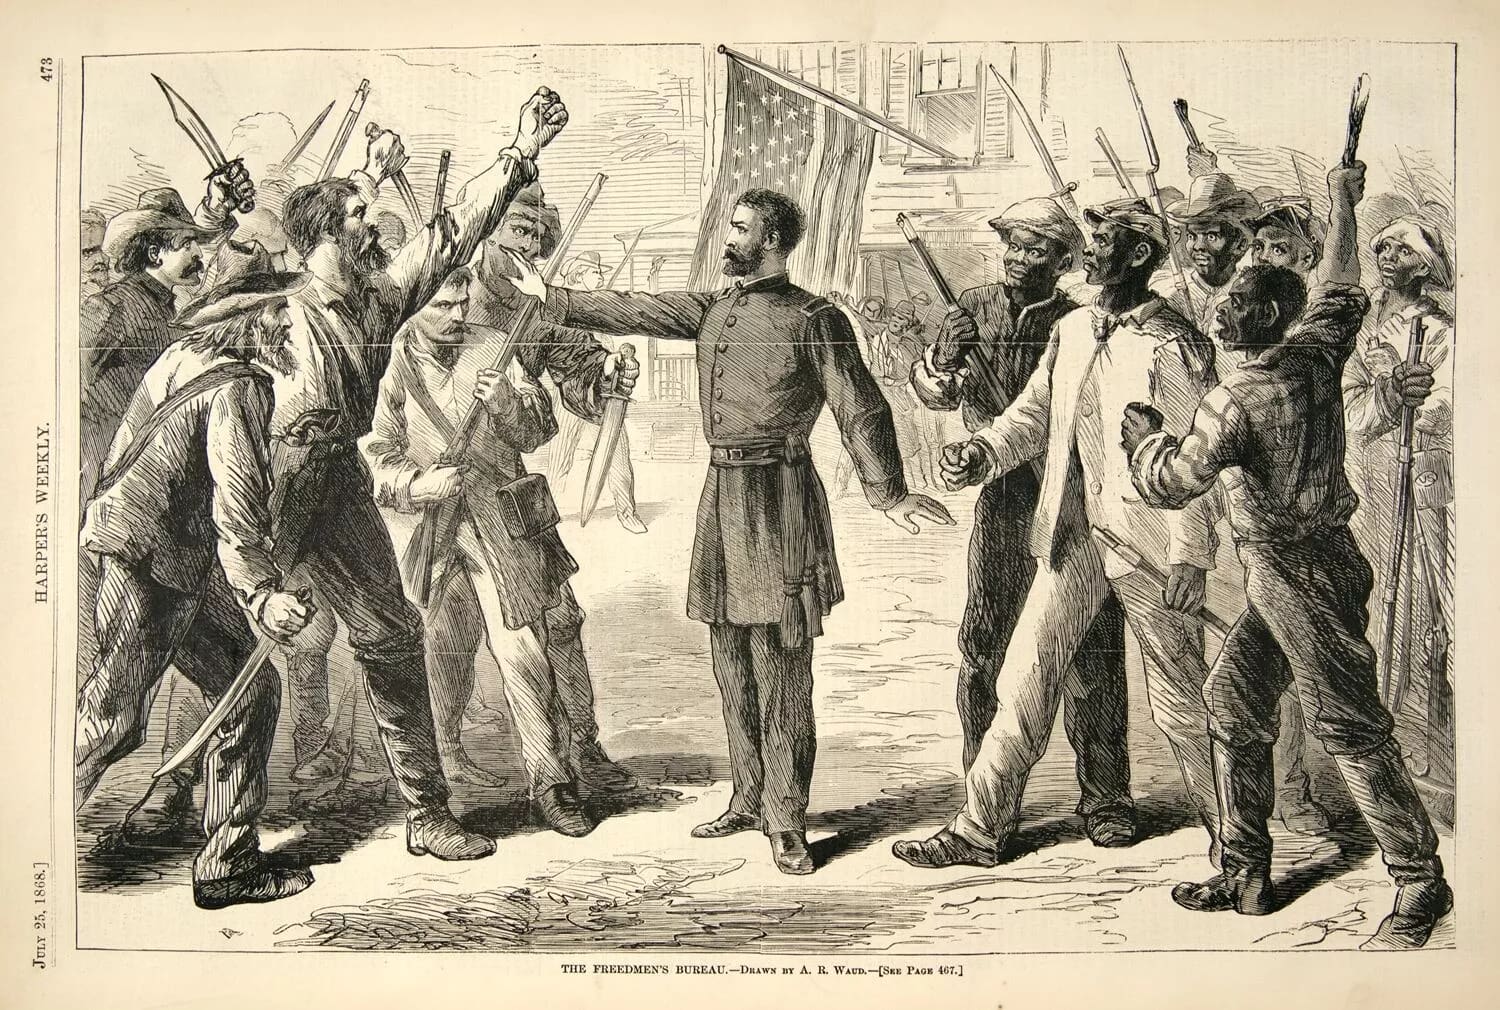 Civil War: Preserving the Union and Abolishing Slavery